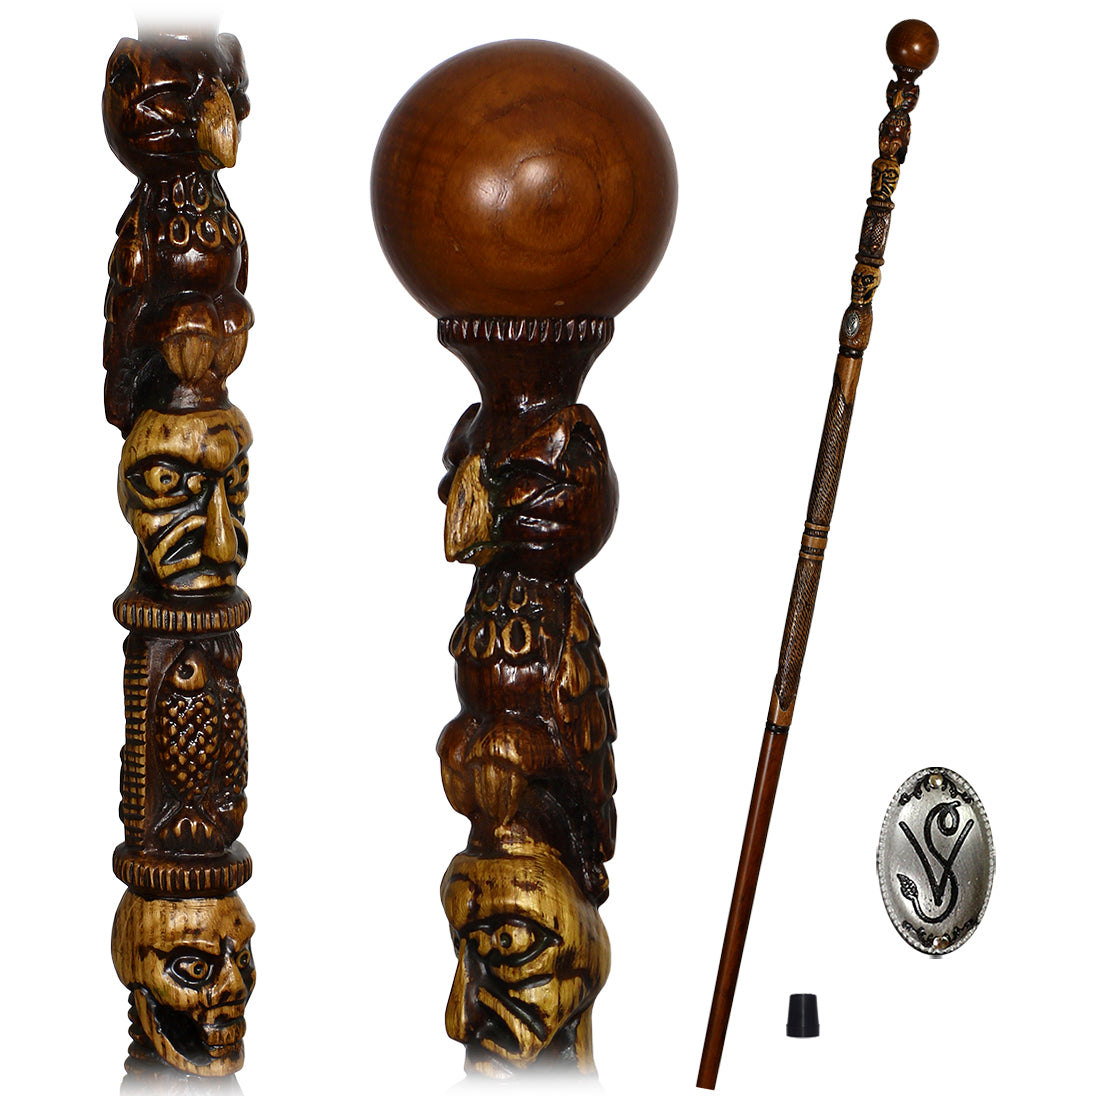 Wooden Walking Cane Red Sandalwood Walking Cane Handcrafted Wooden